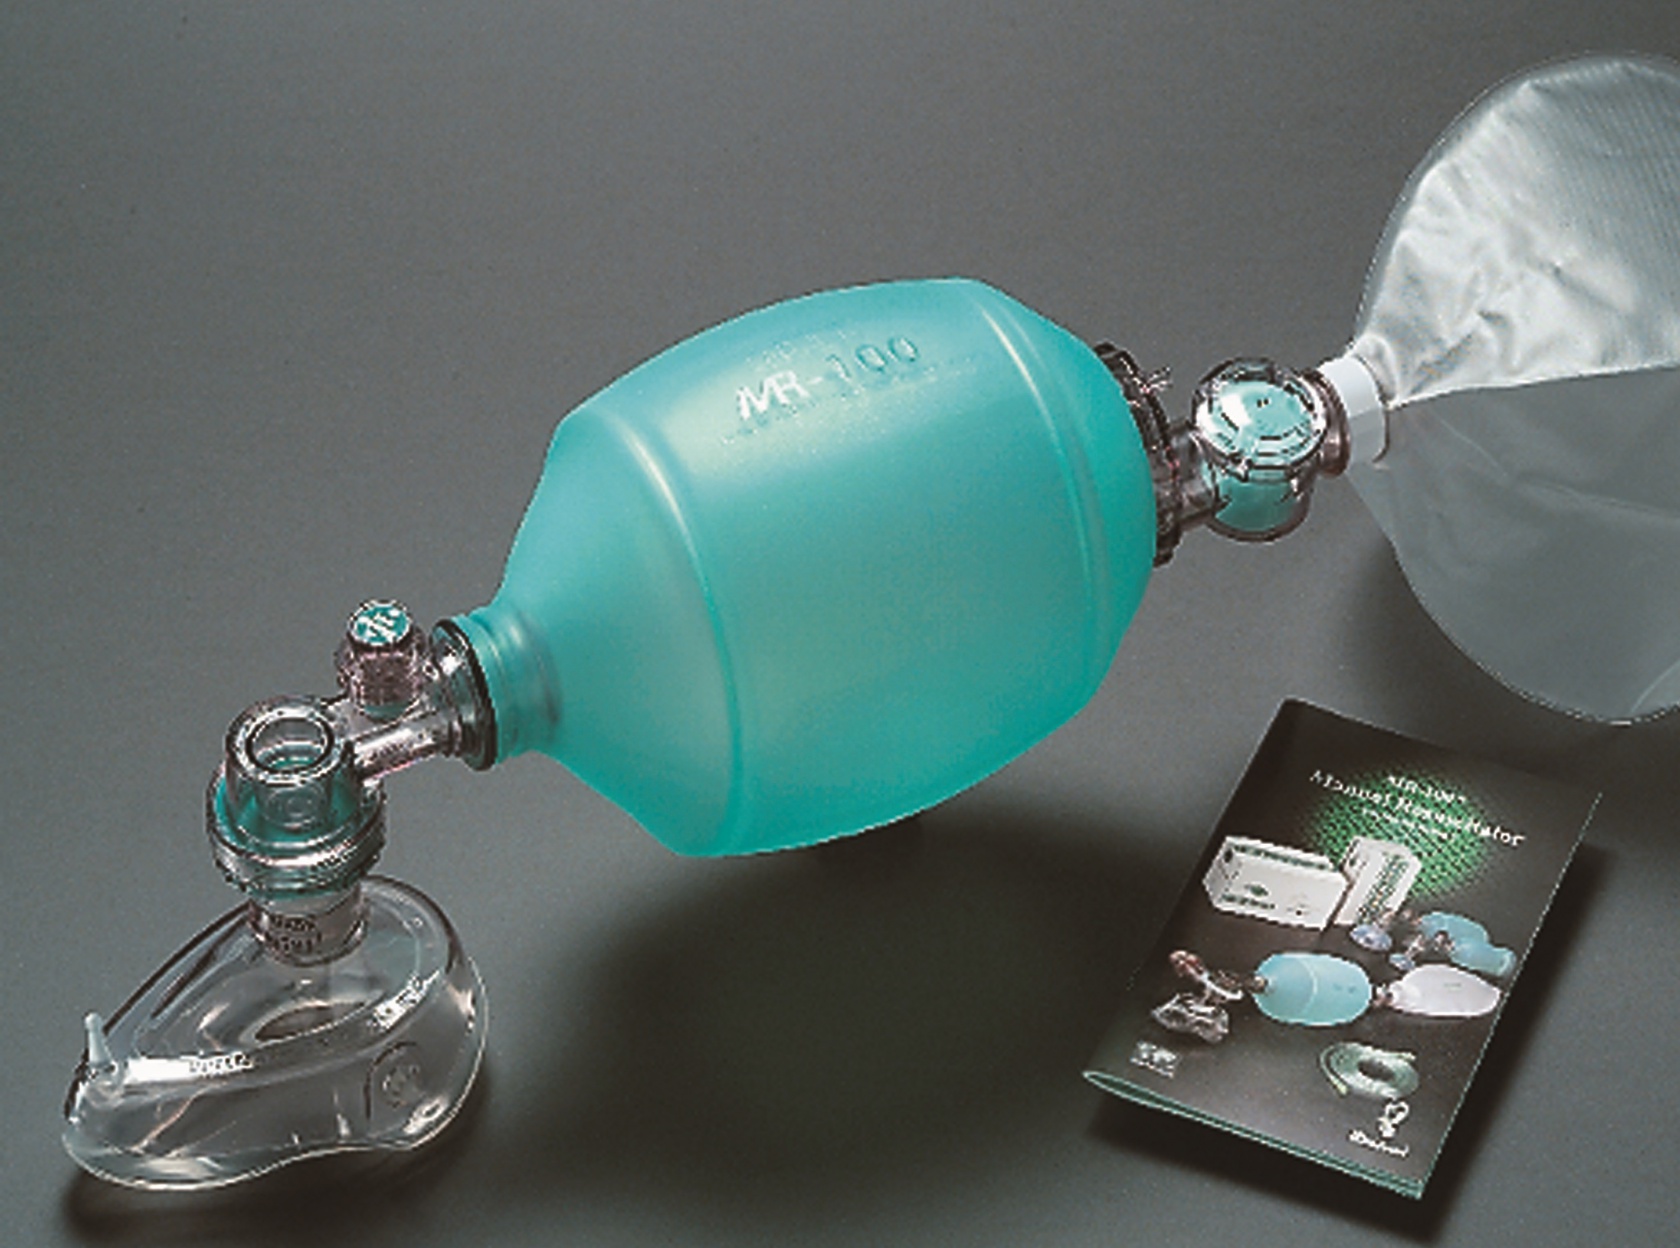 Galemed MR-100 Durable Silicone Resuscitator Adult with 5145 Mask